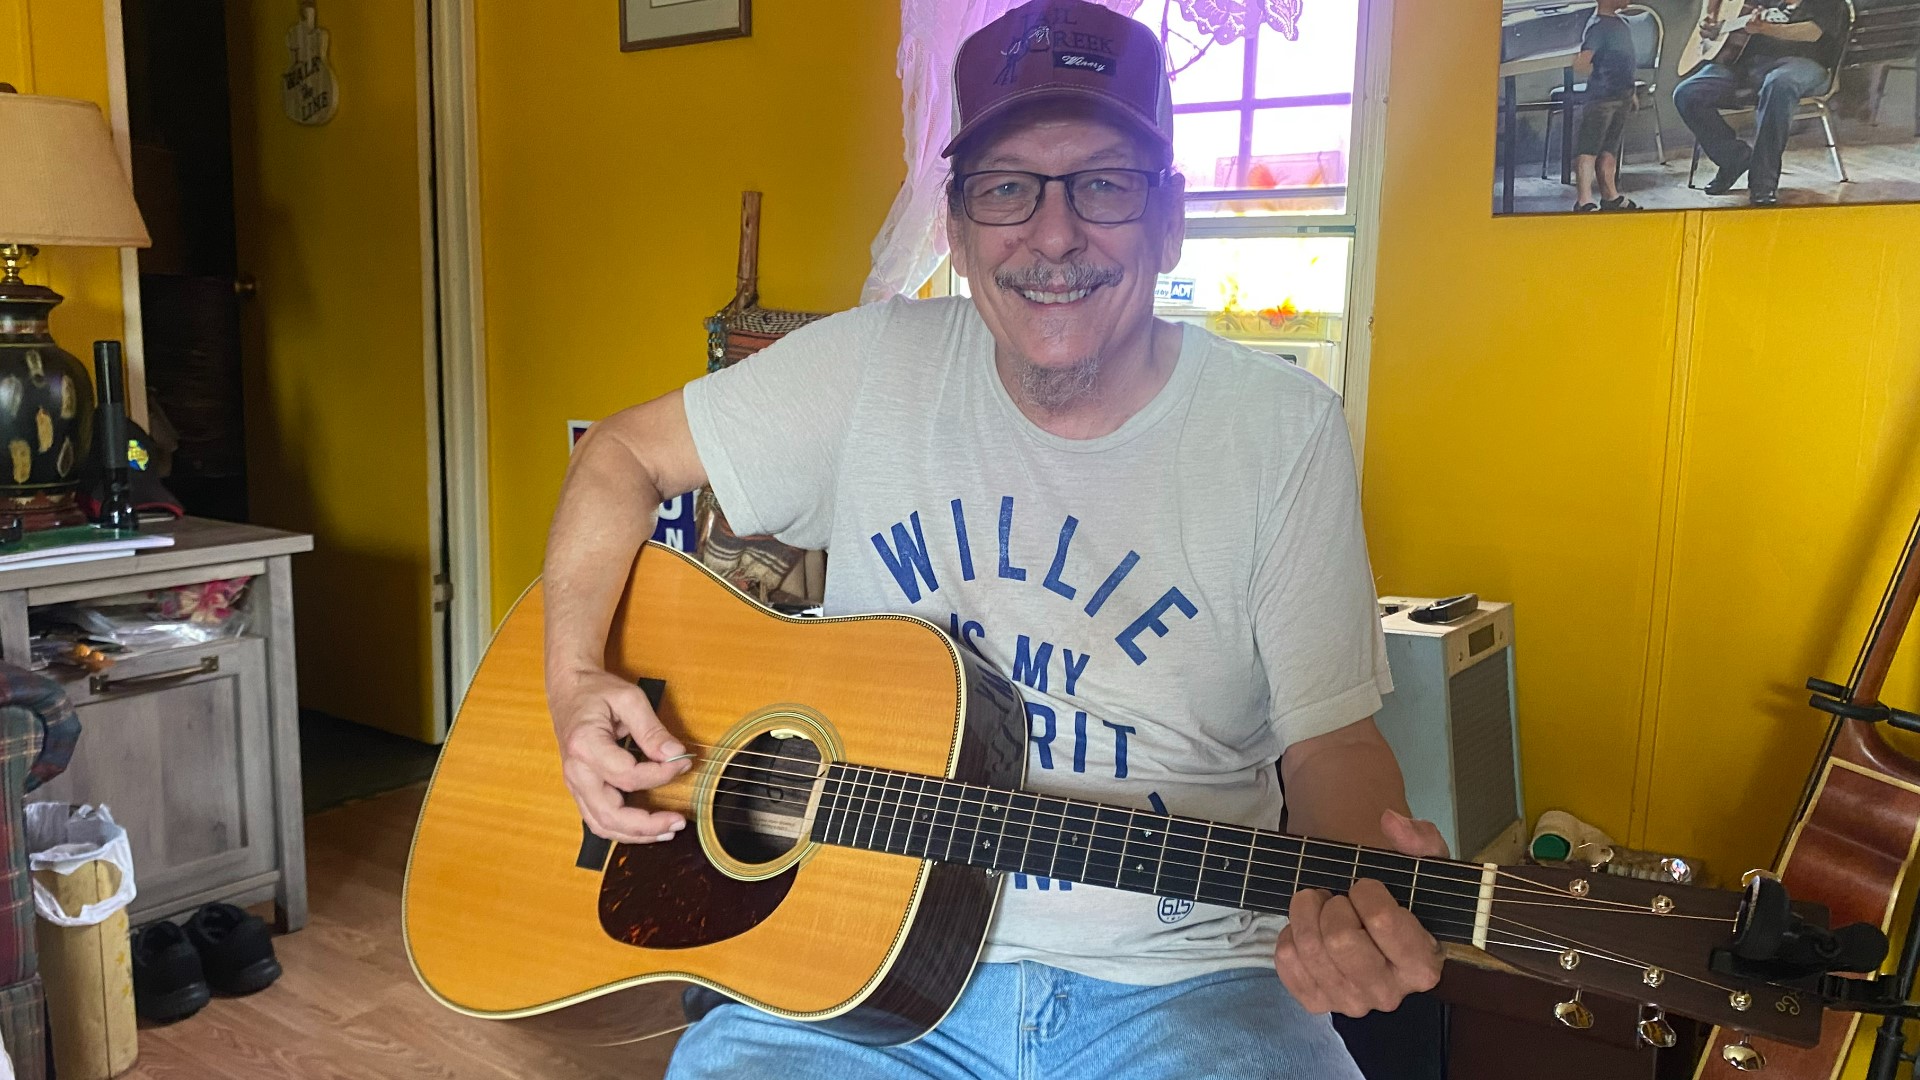 Mark Johnson says he's been playing the guitar since kindergarten and music is God's gift to him.
A gift he's been sharing with the world for decades.